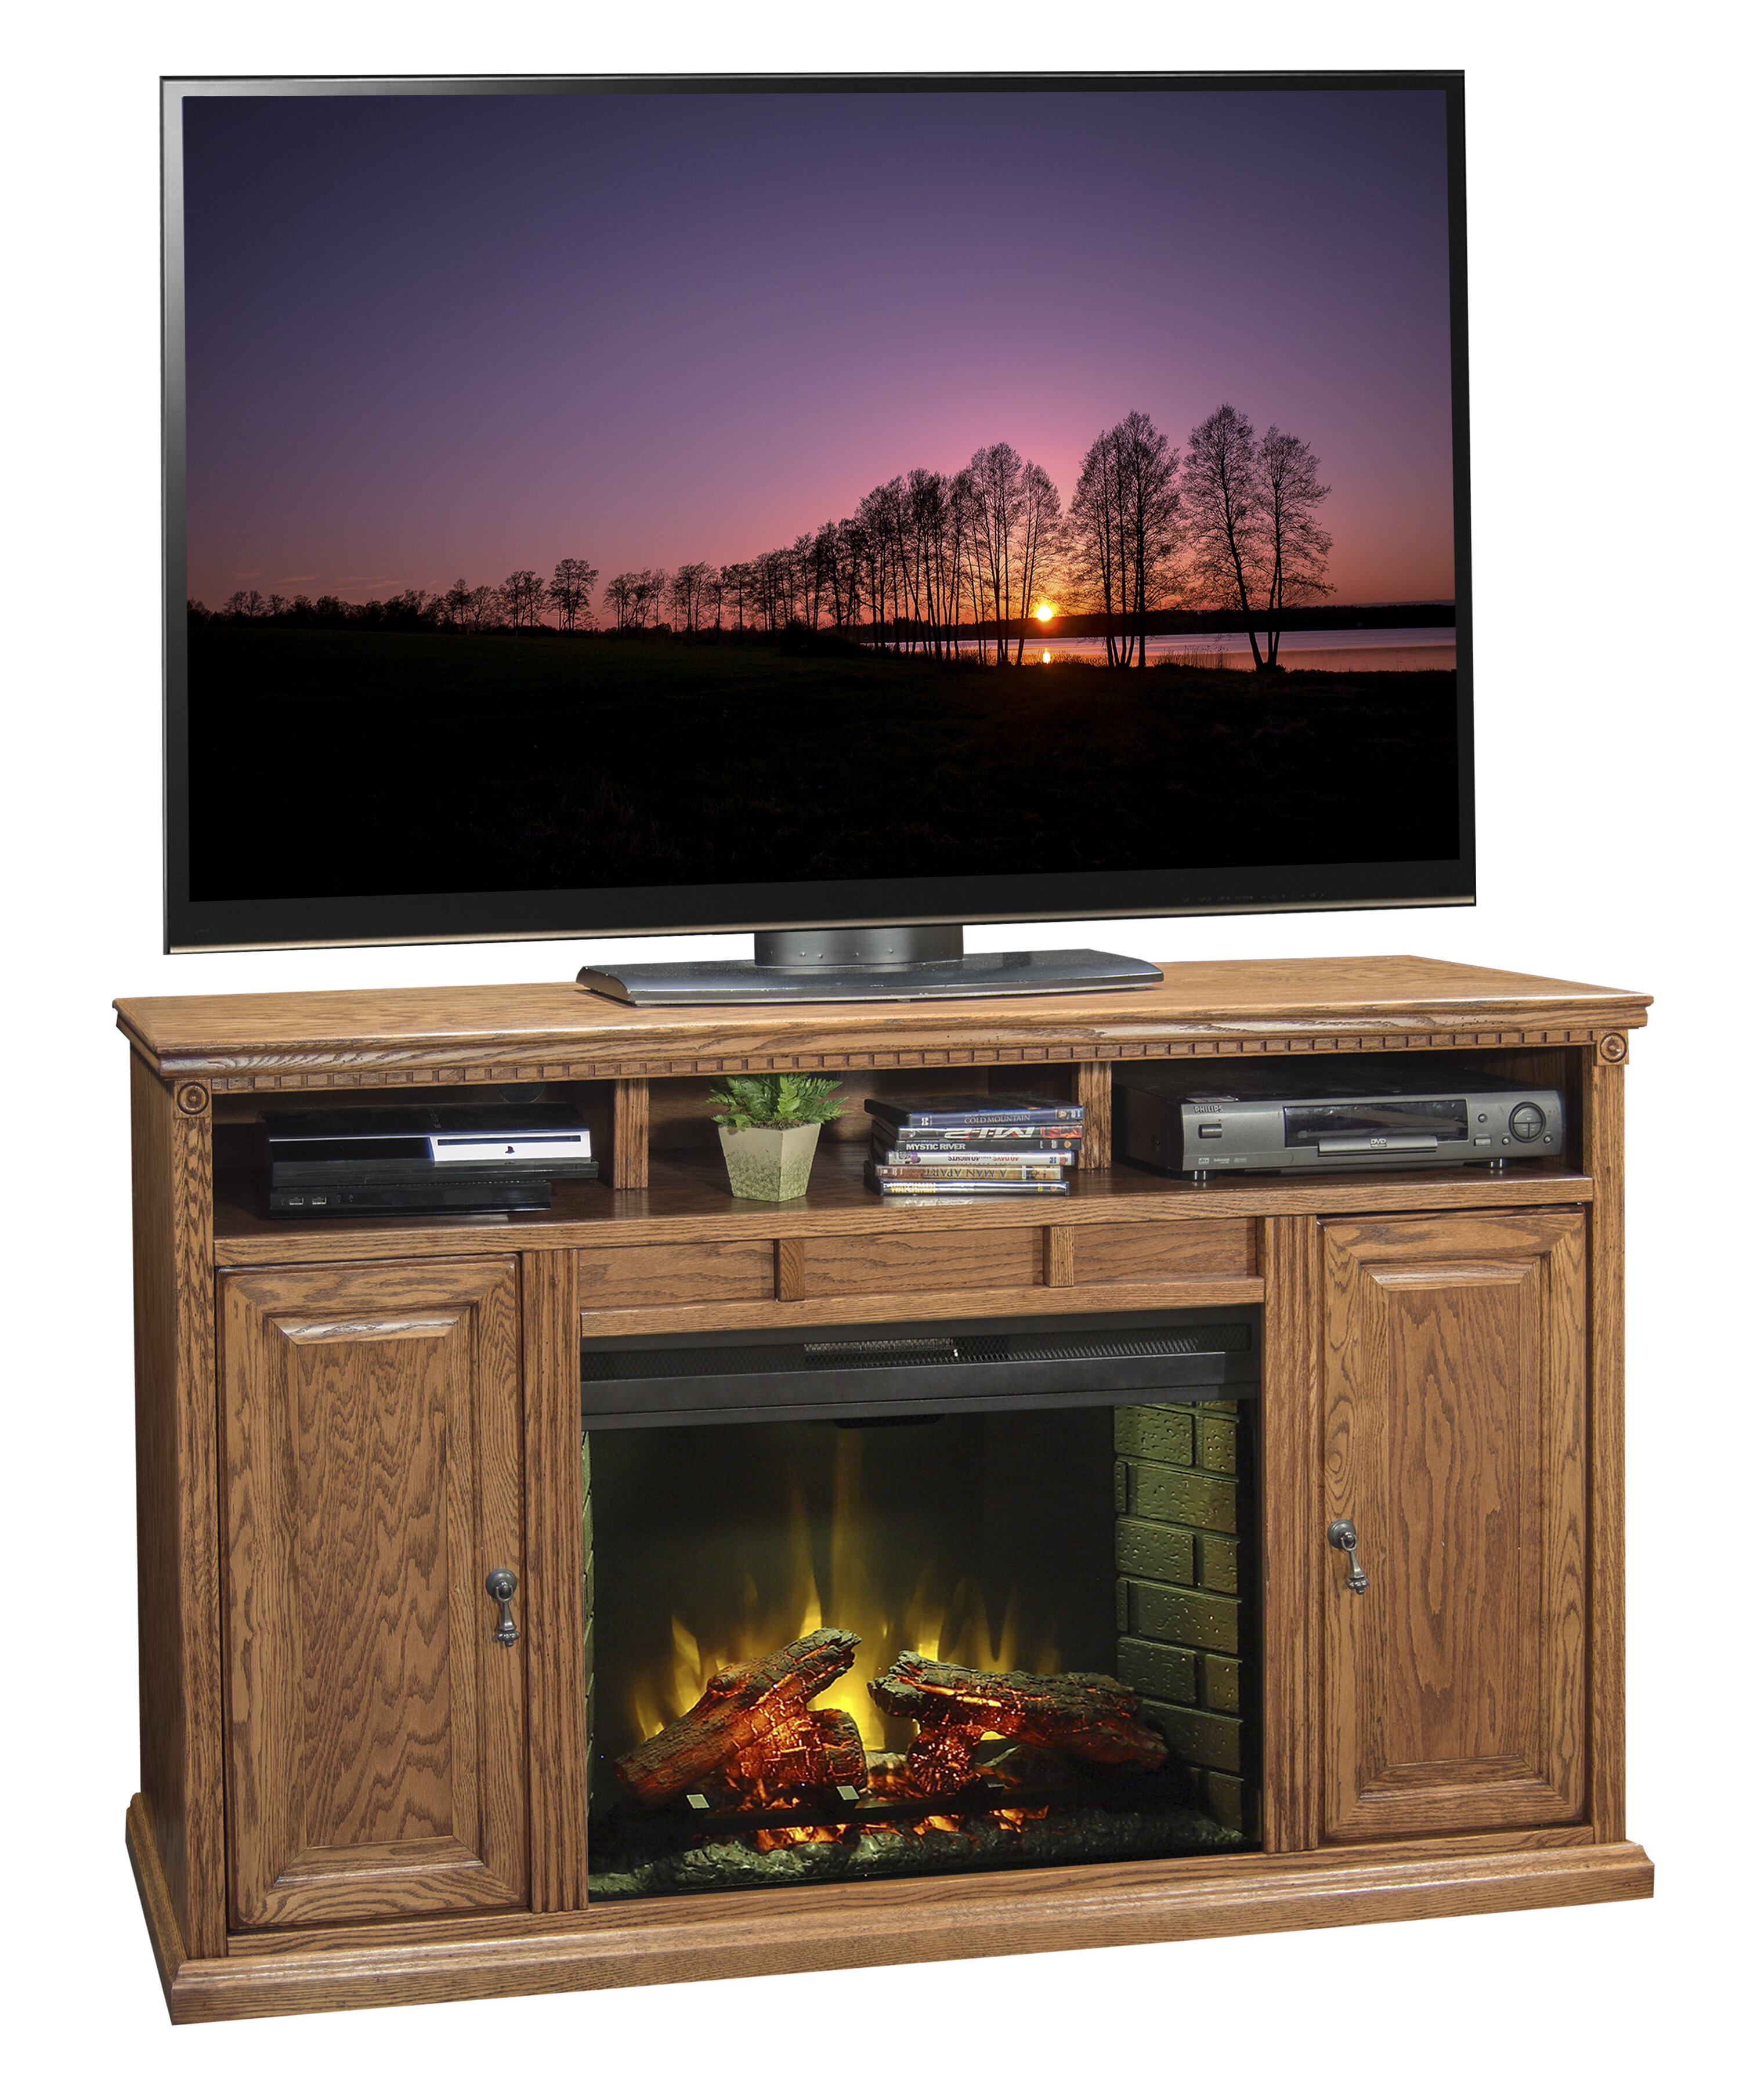 Legends Furniture Scottsdale 62" TV Stand with Fireplace